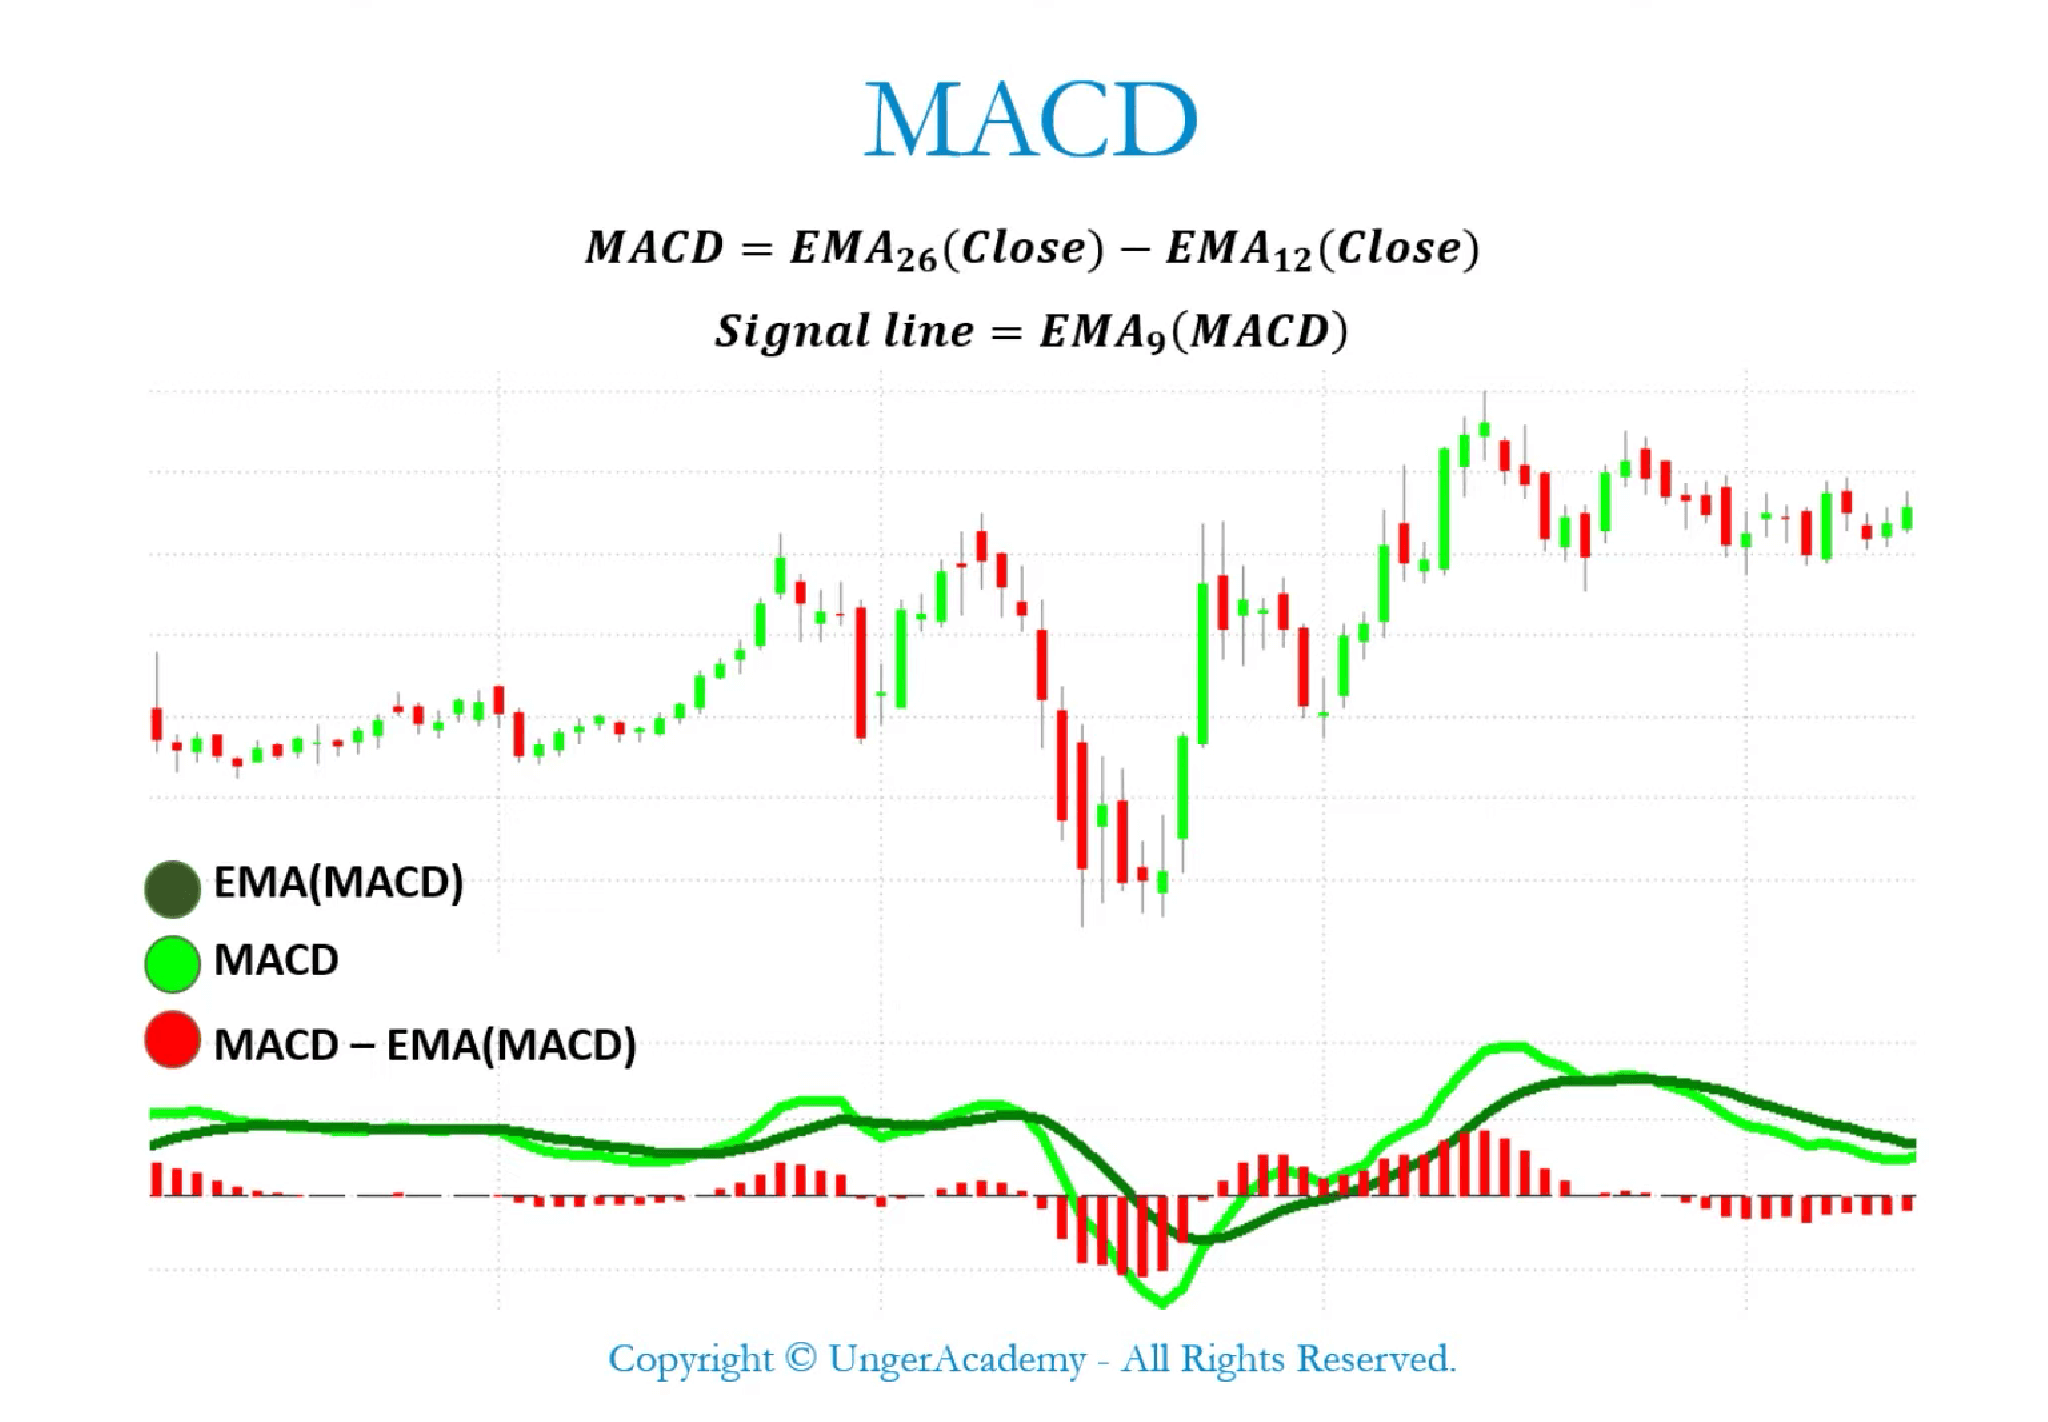 trading with the MACD indicator